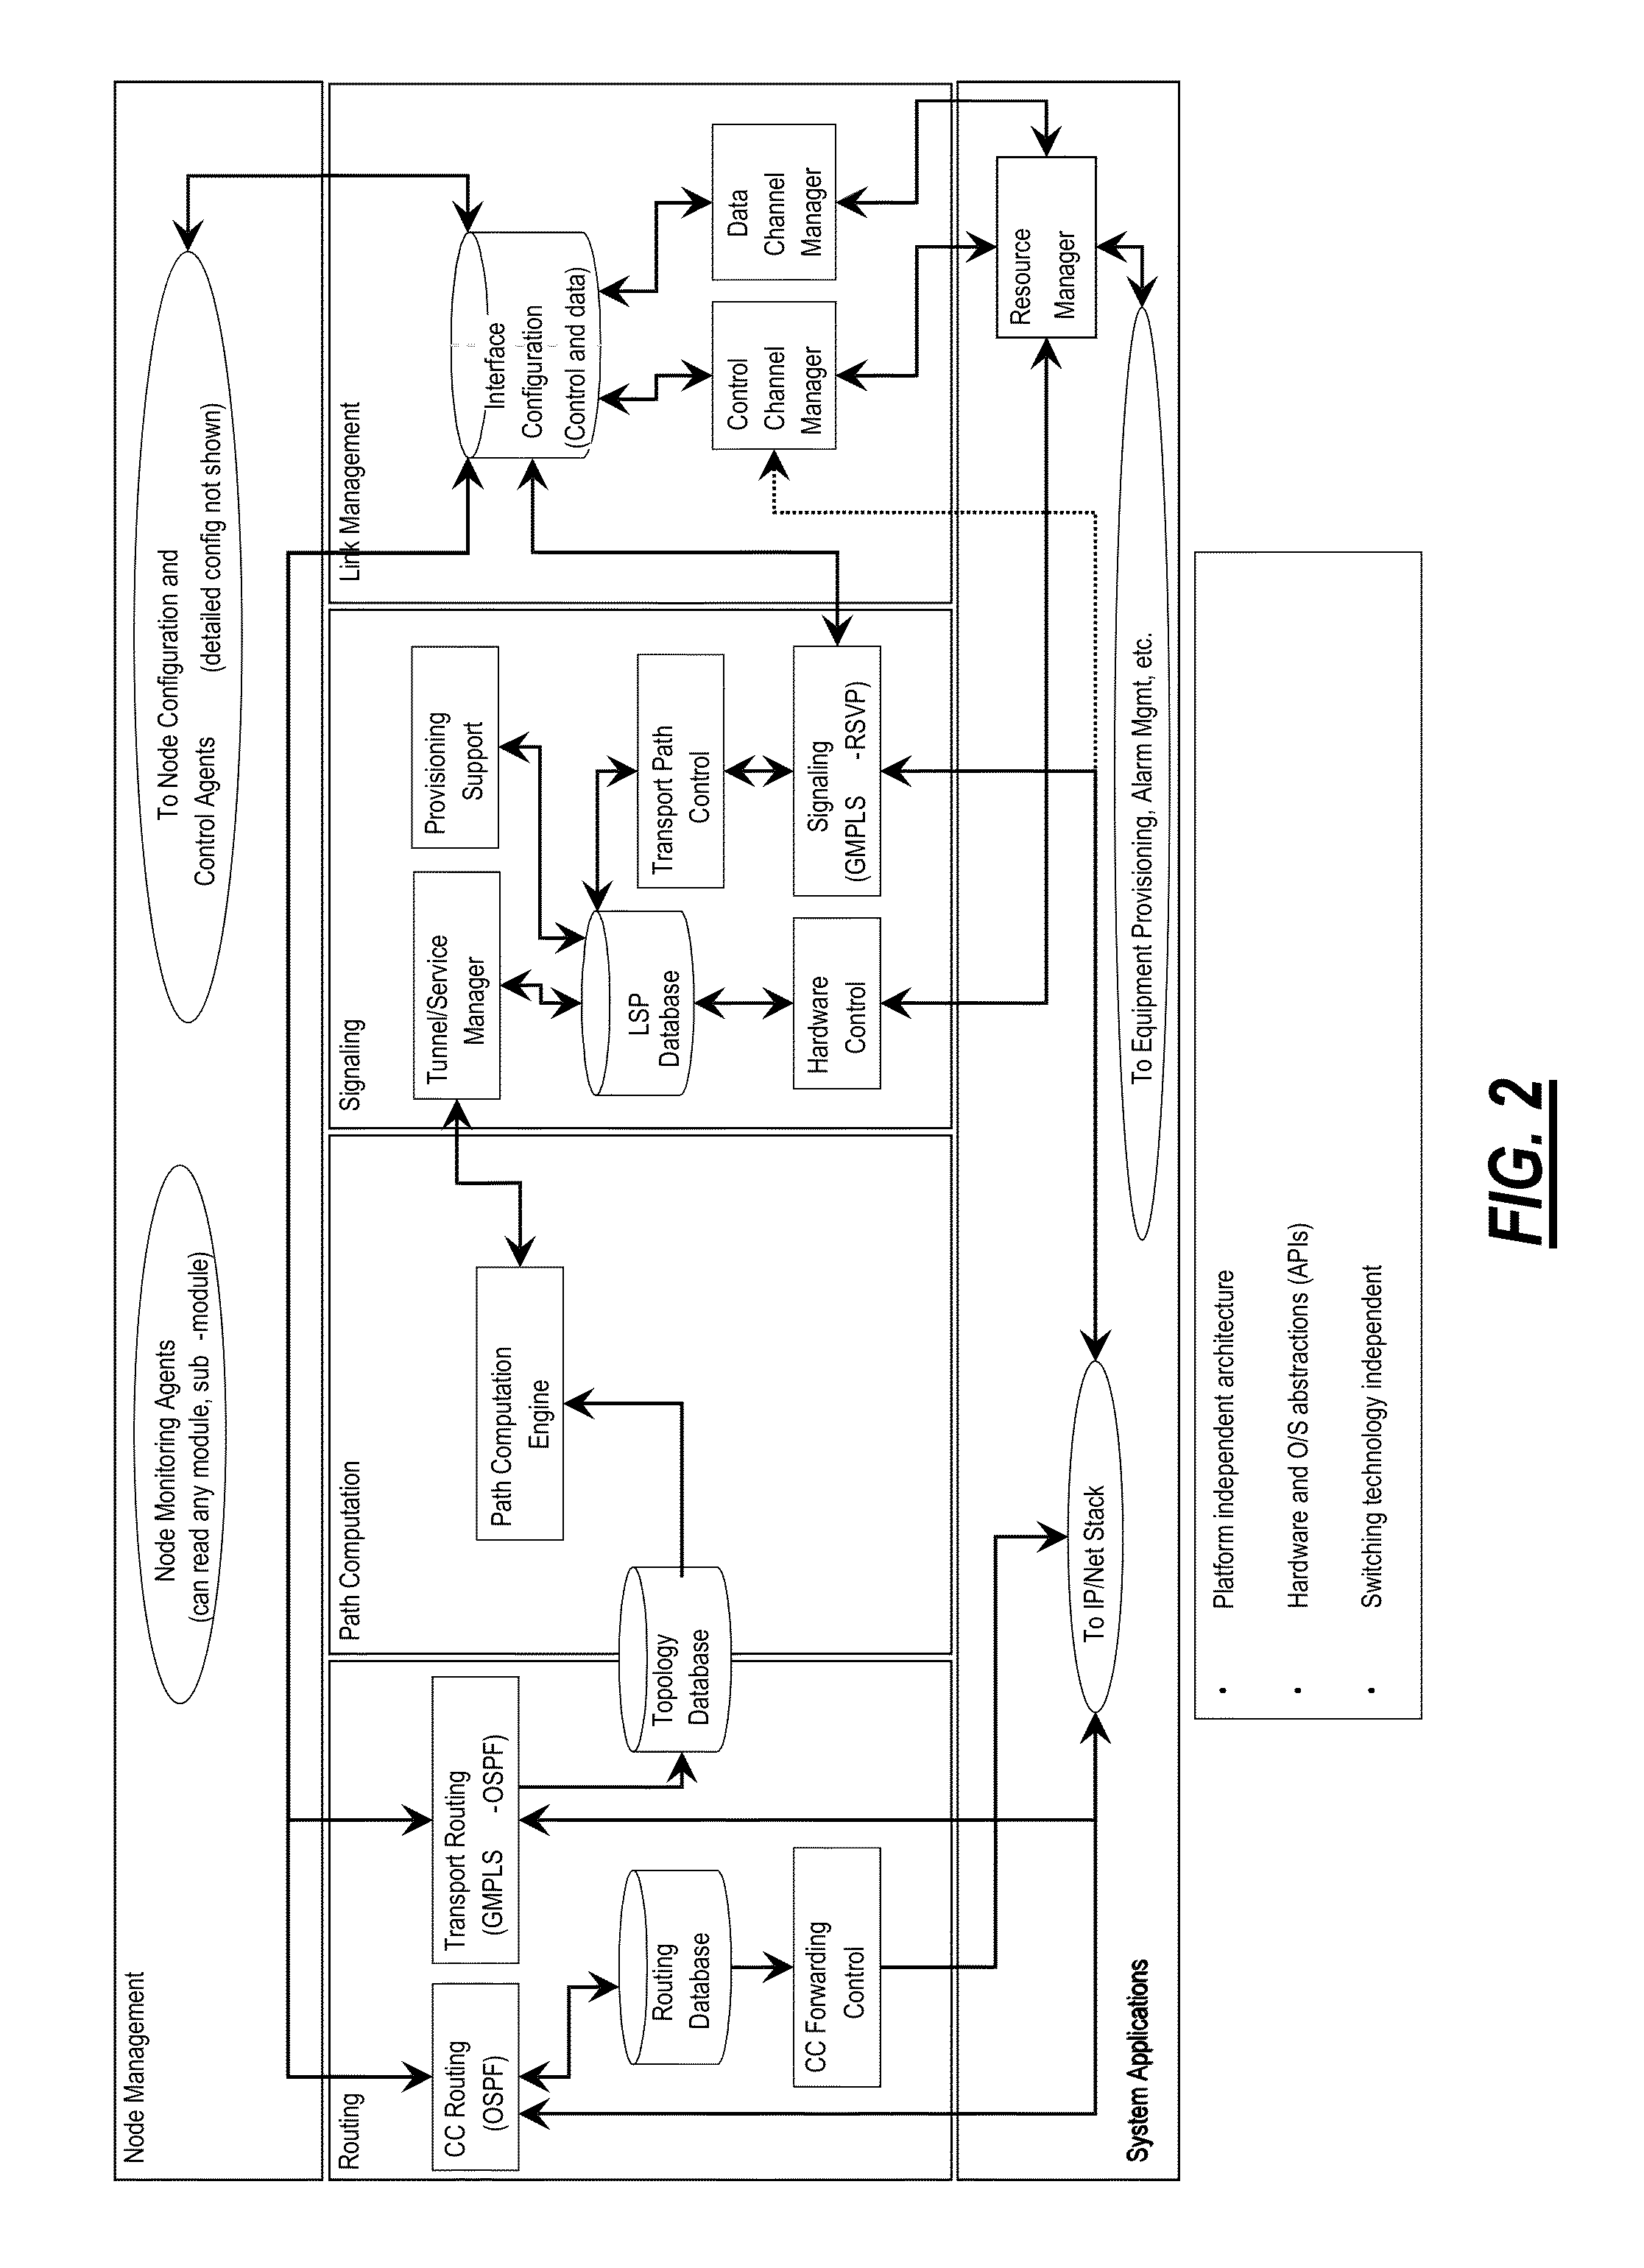 Coherent probe and optical service channel systems and methods for optical networks